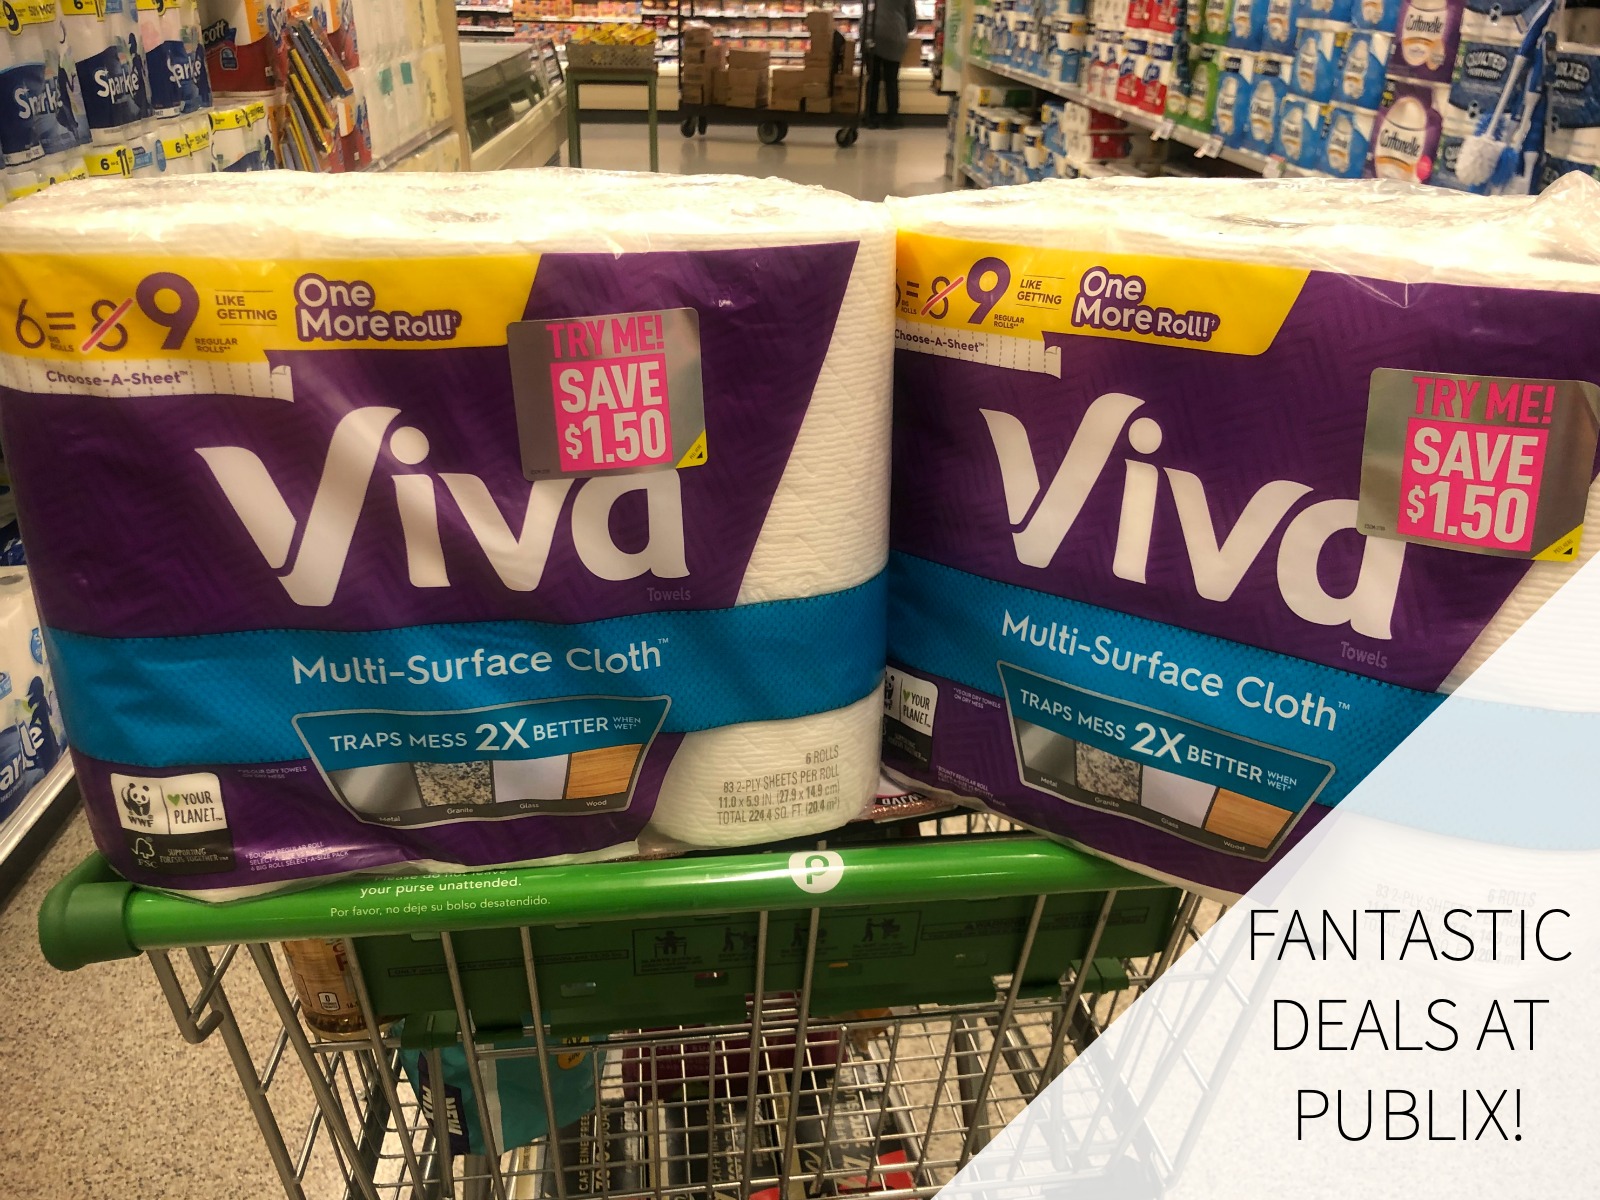 Fantastic Deals On Cottonelle Toilet Paper And Viva Paper Towels This Week At Publix – Time To Stock Your Cart!